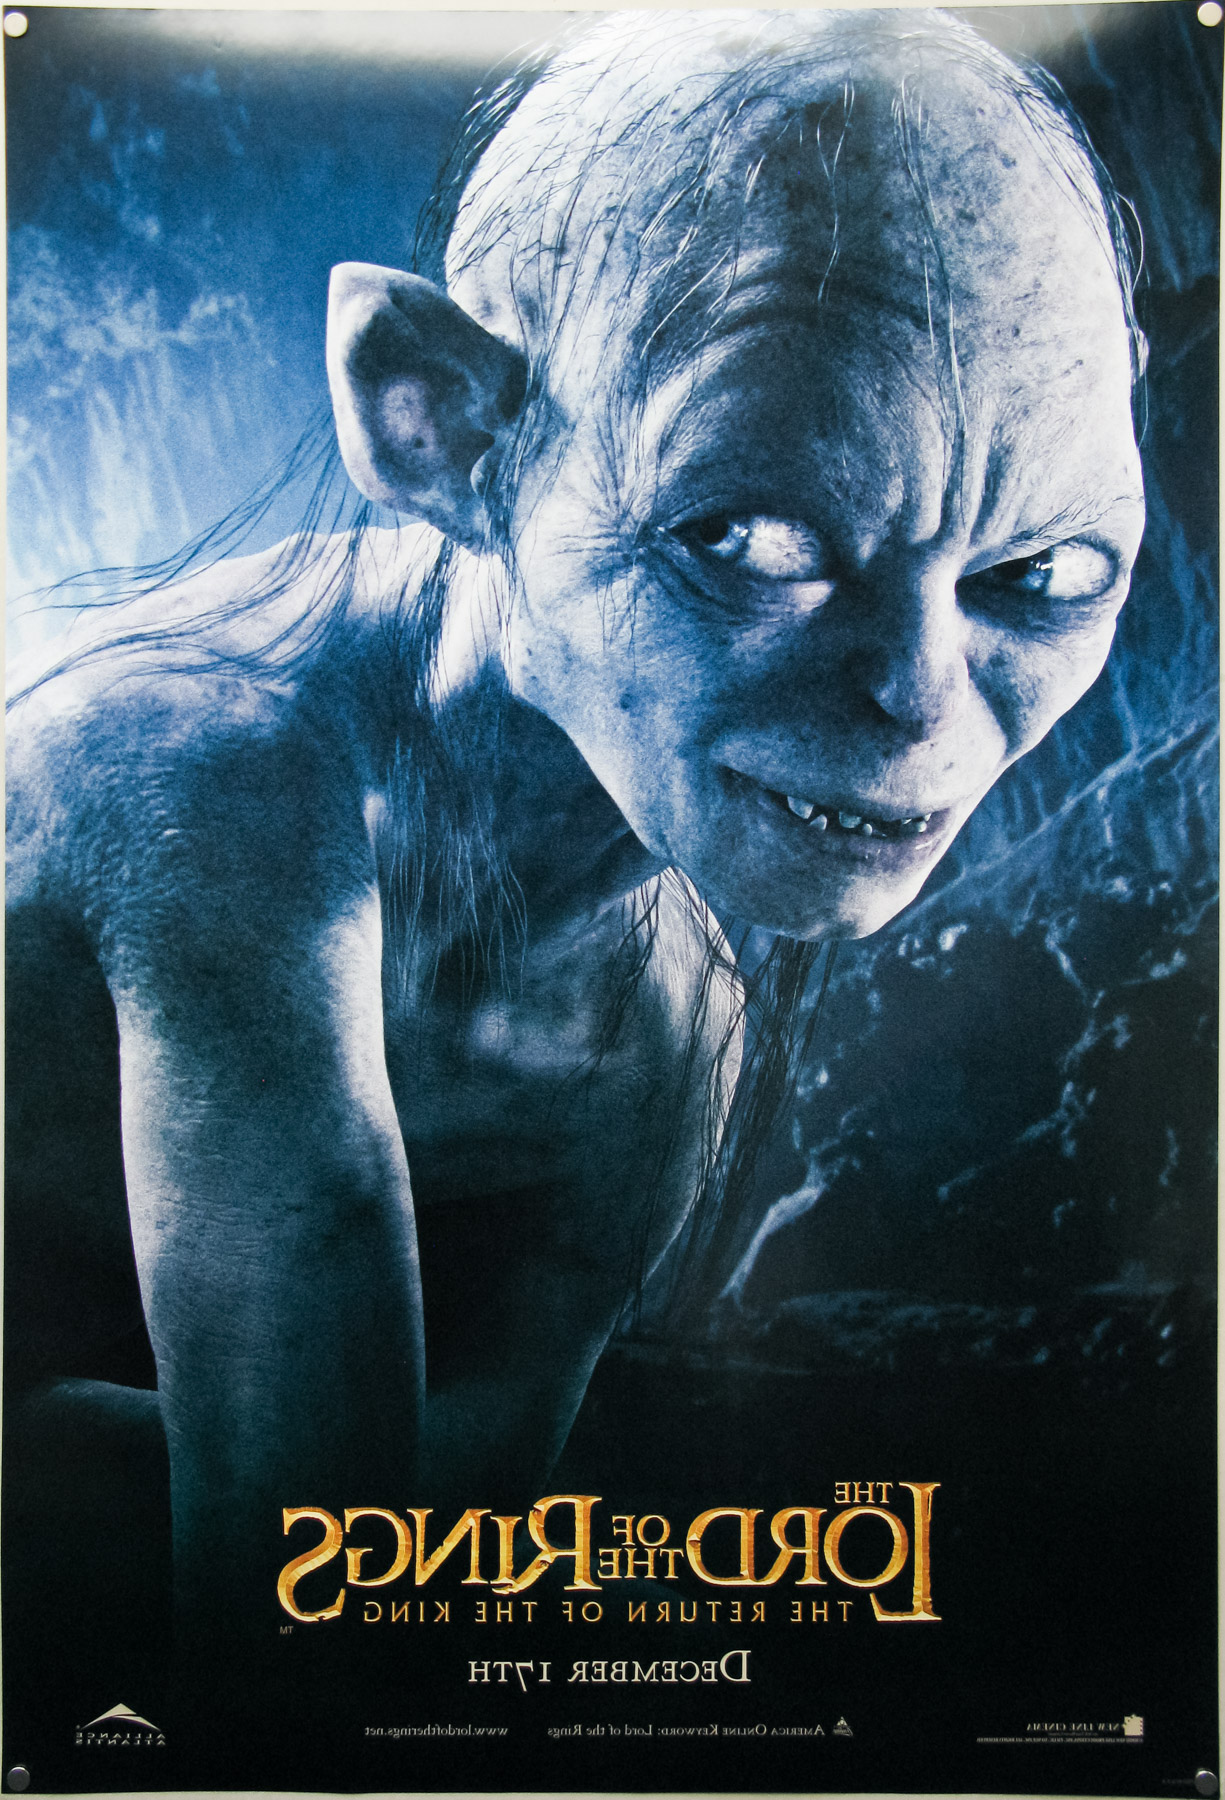 lord of the rings return of the king gollum toybiz